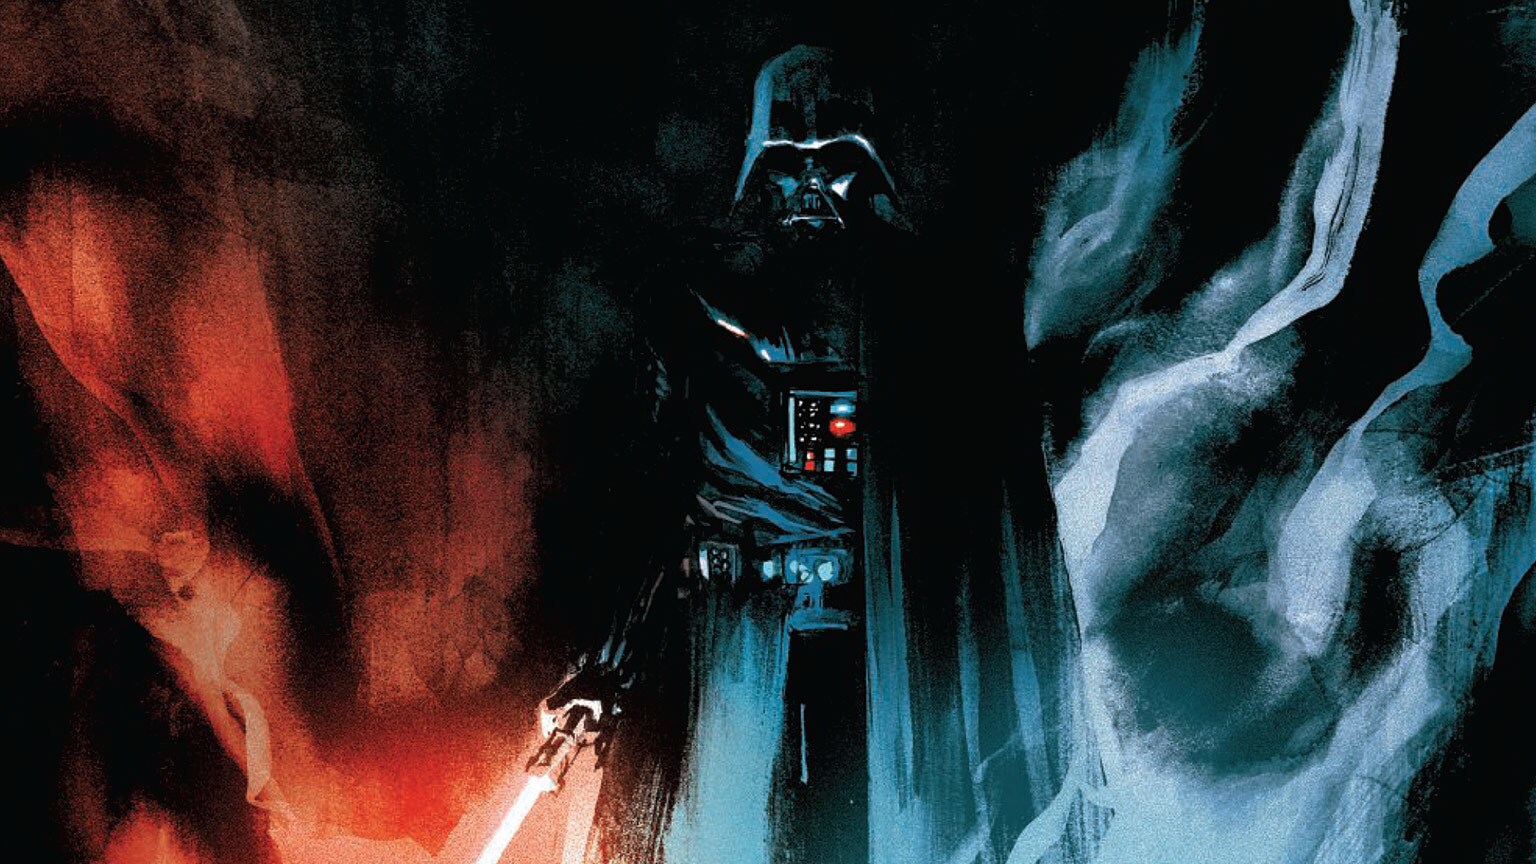 Charles Soule on the Powerful First Arc of Marvel's Darth Vader